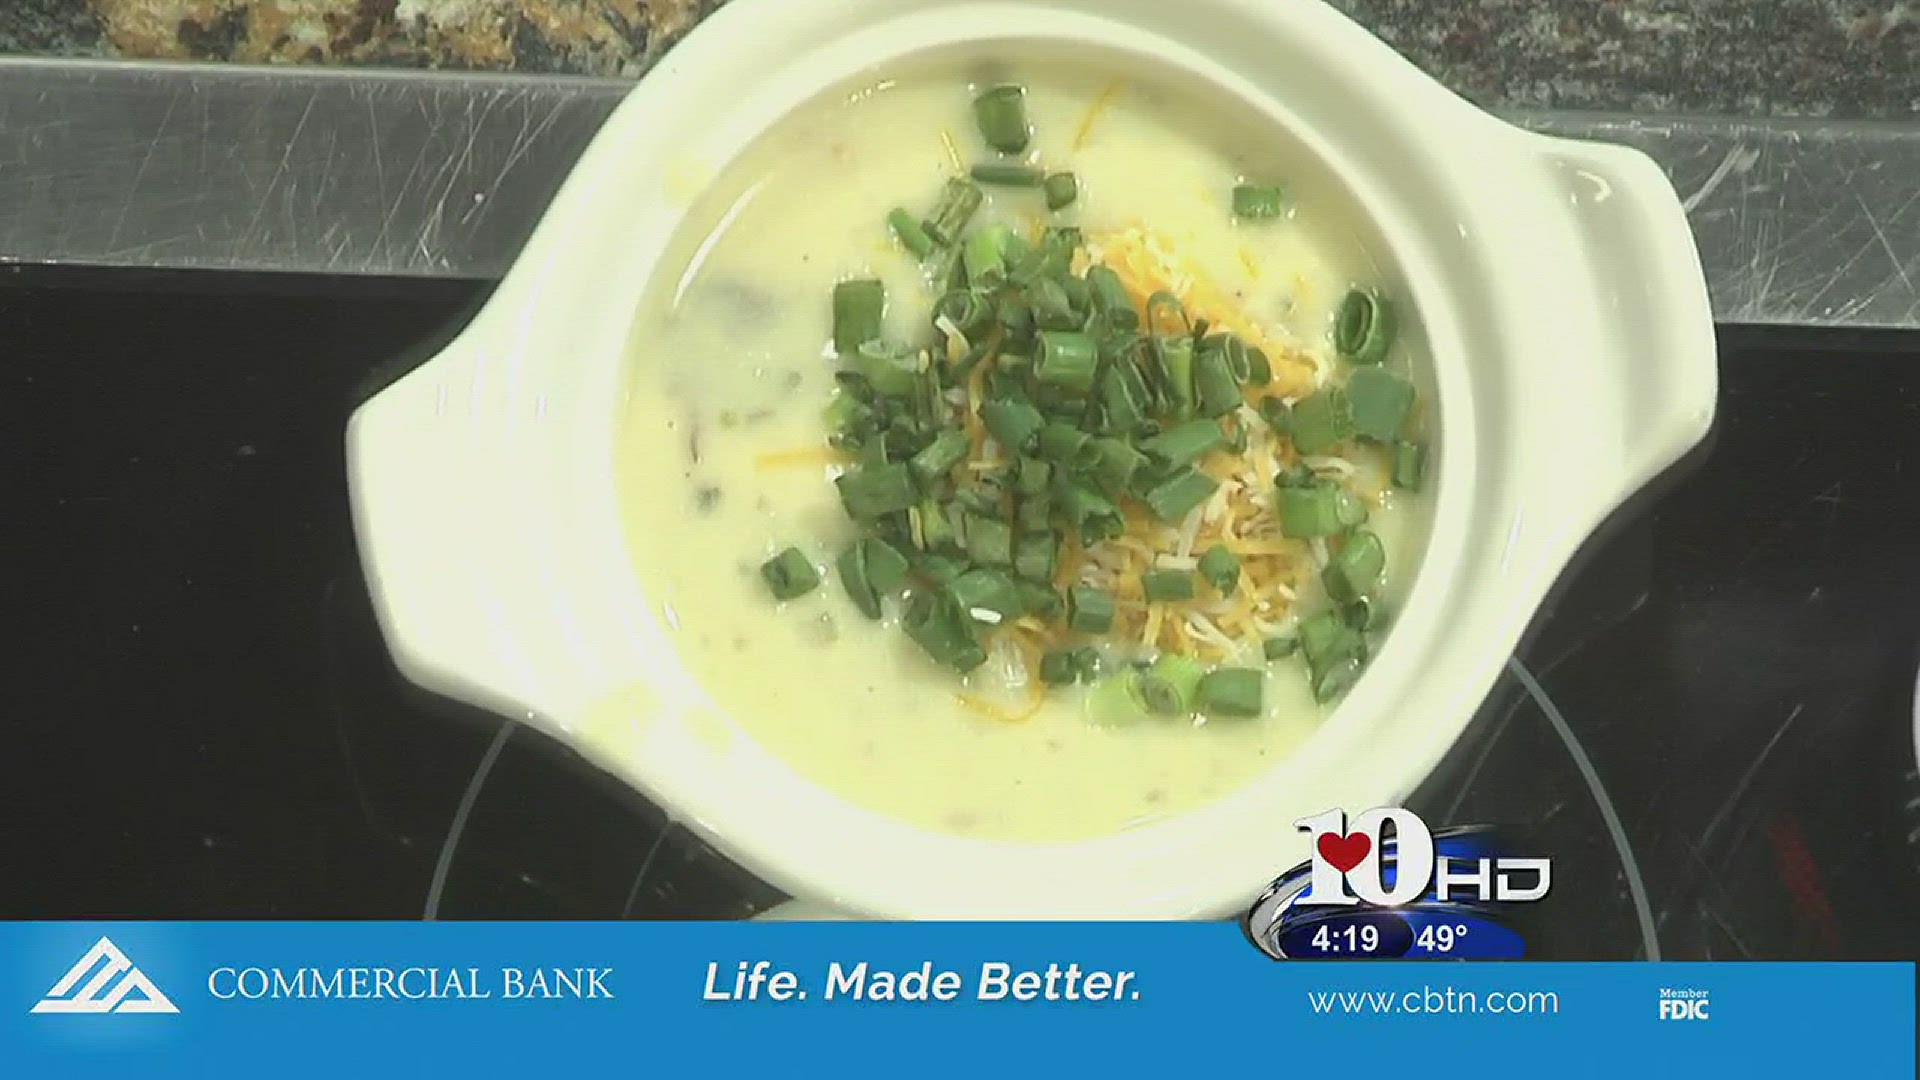 January 29
Live at Five at 4
Chef Roman Campbell prepares a recipe for loaded potato soup